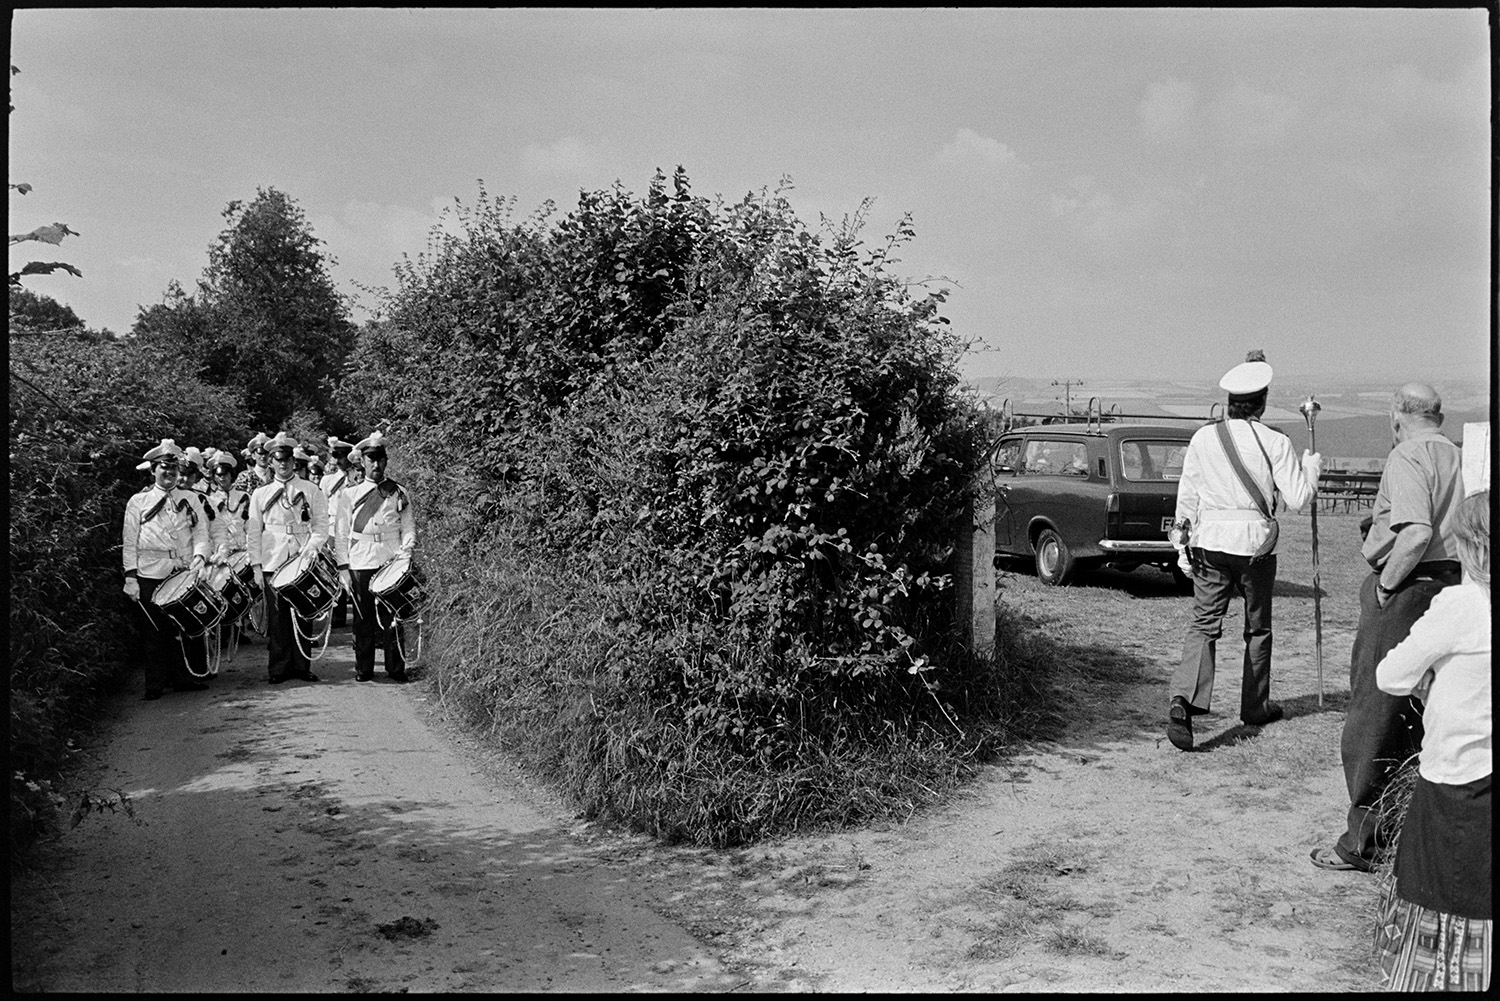 Band and drum majorettes on parade. 
[A band leader holding a mace and a drum band marching along a lane and into a field for Atherington Village fete.]